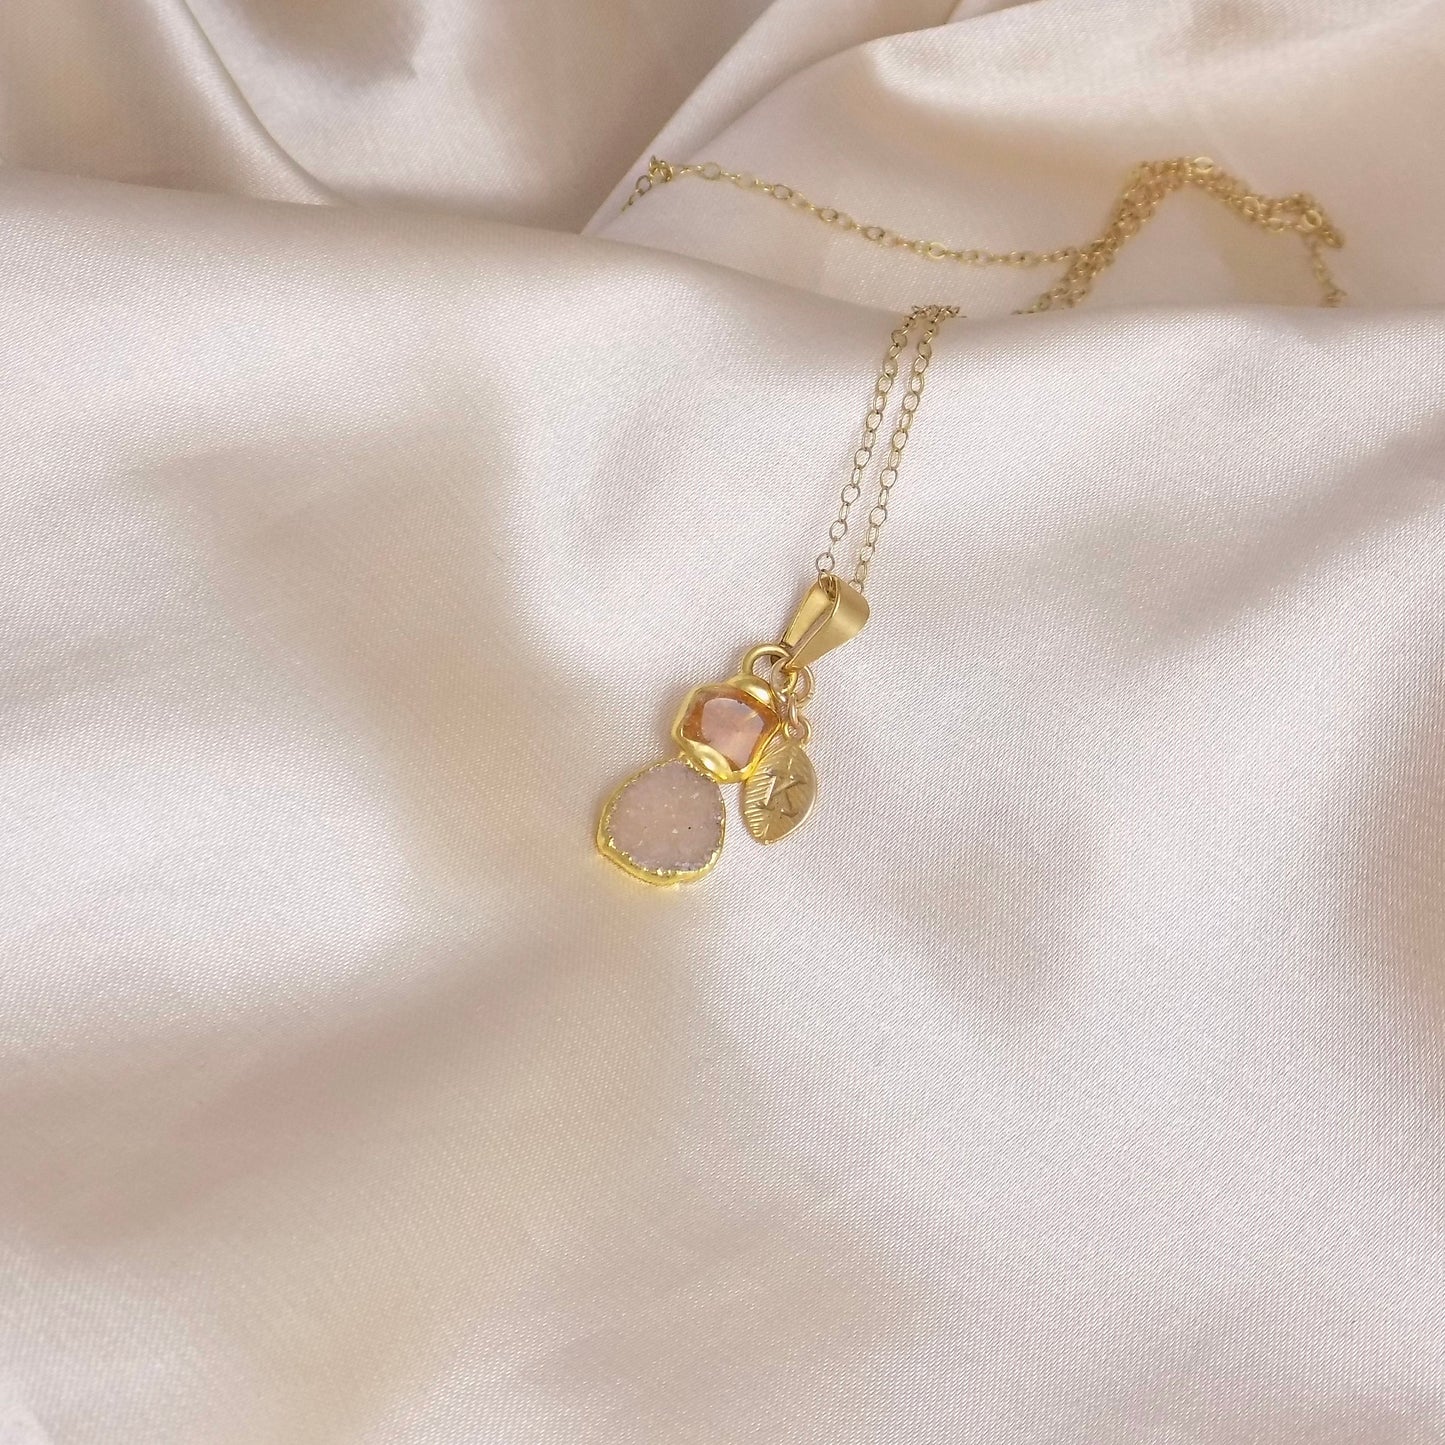 Unique Citrine Crystal Minimalist Necklace Gold, Personalized Druzy Charm with Initial, Yellow Stone, Gifts For Mom, M7-08